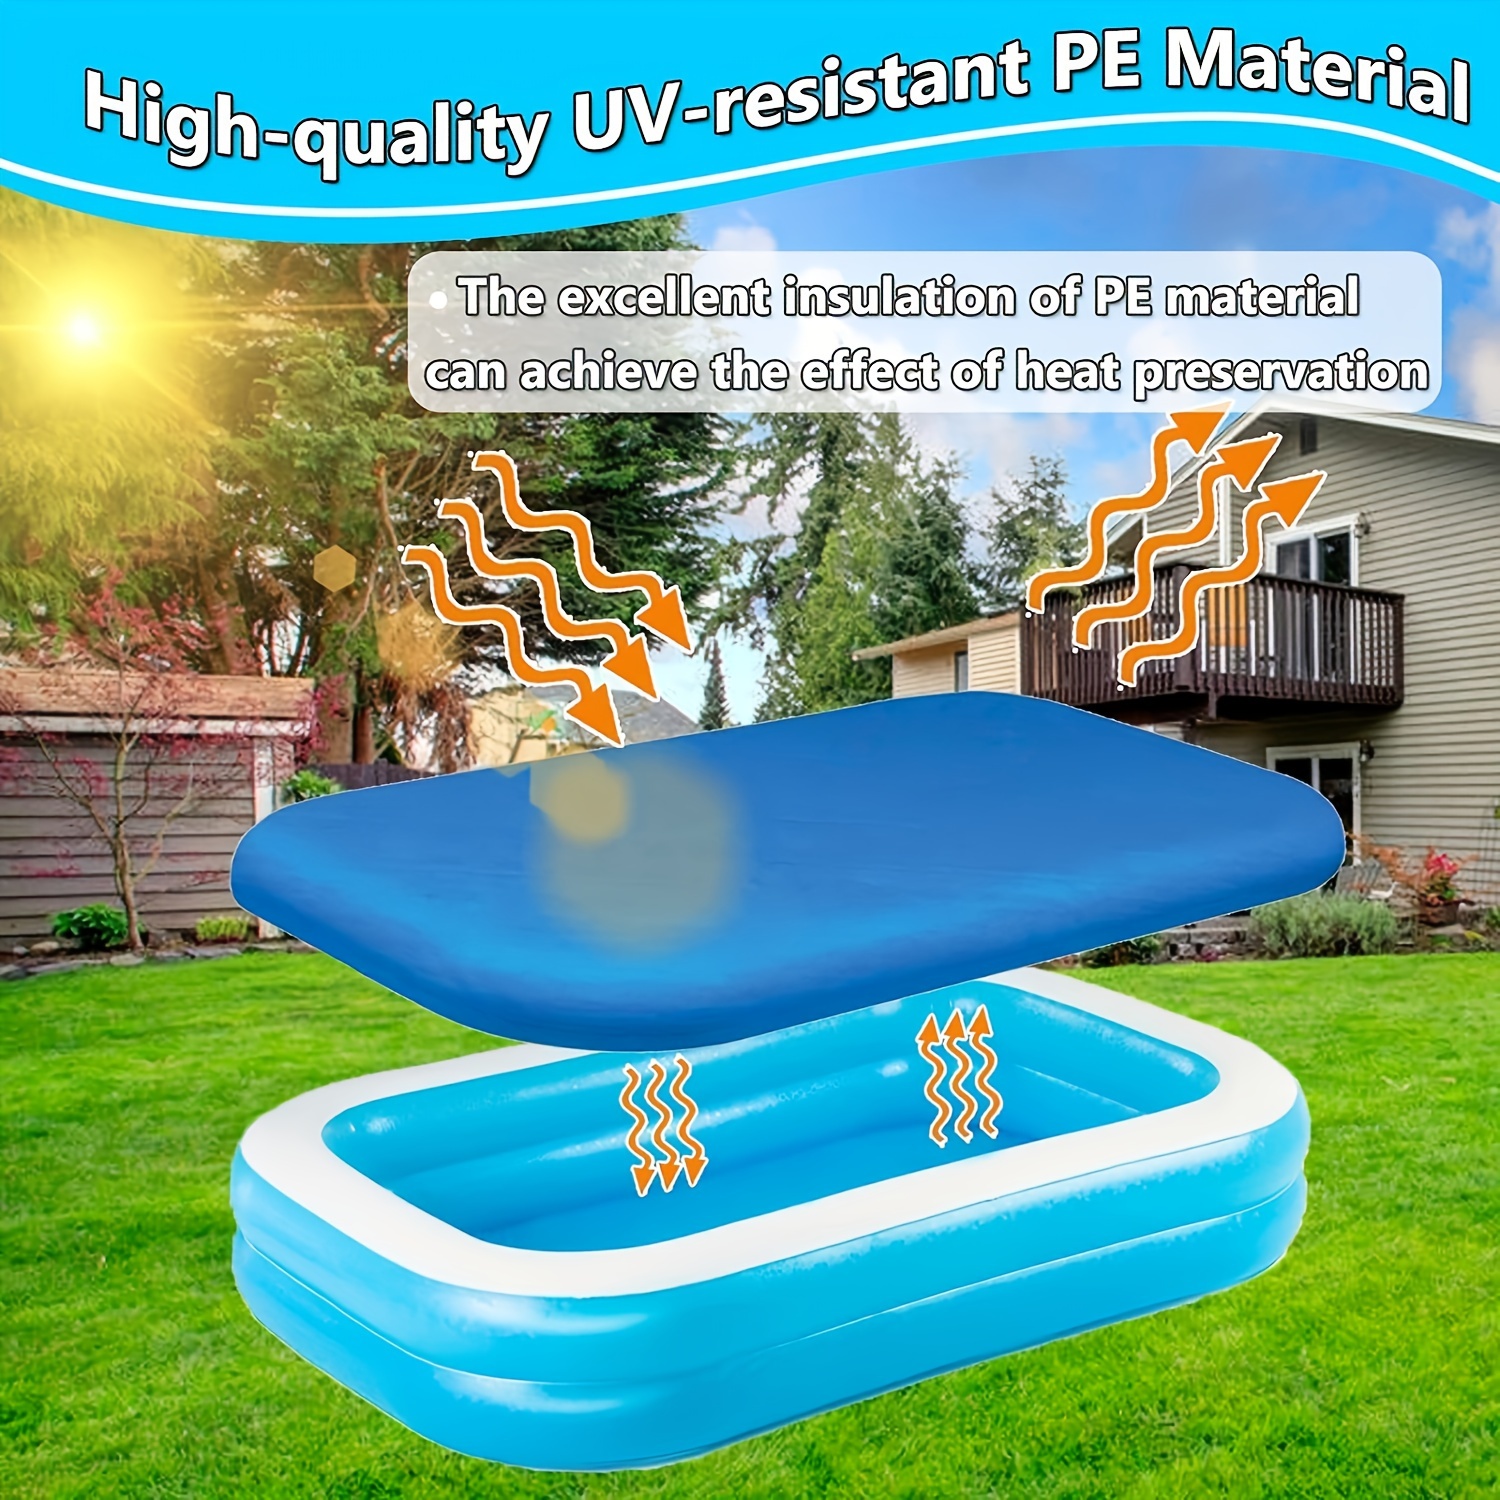 

Premium Inflatable Pool Cover - Durable Plastic, Multiple Components Included, Perfect For Outdoor Family Pools